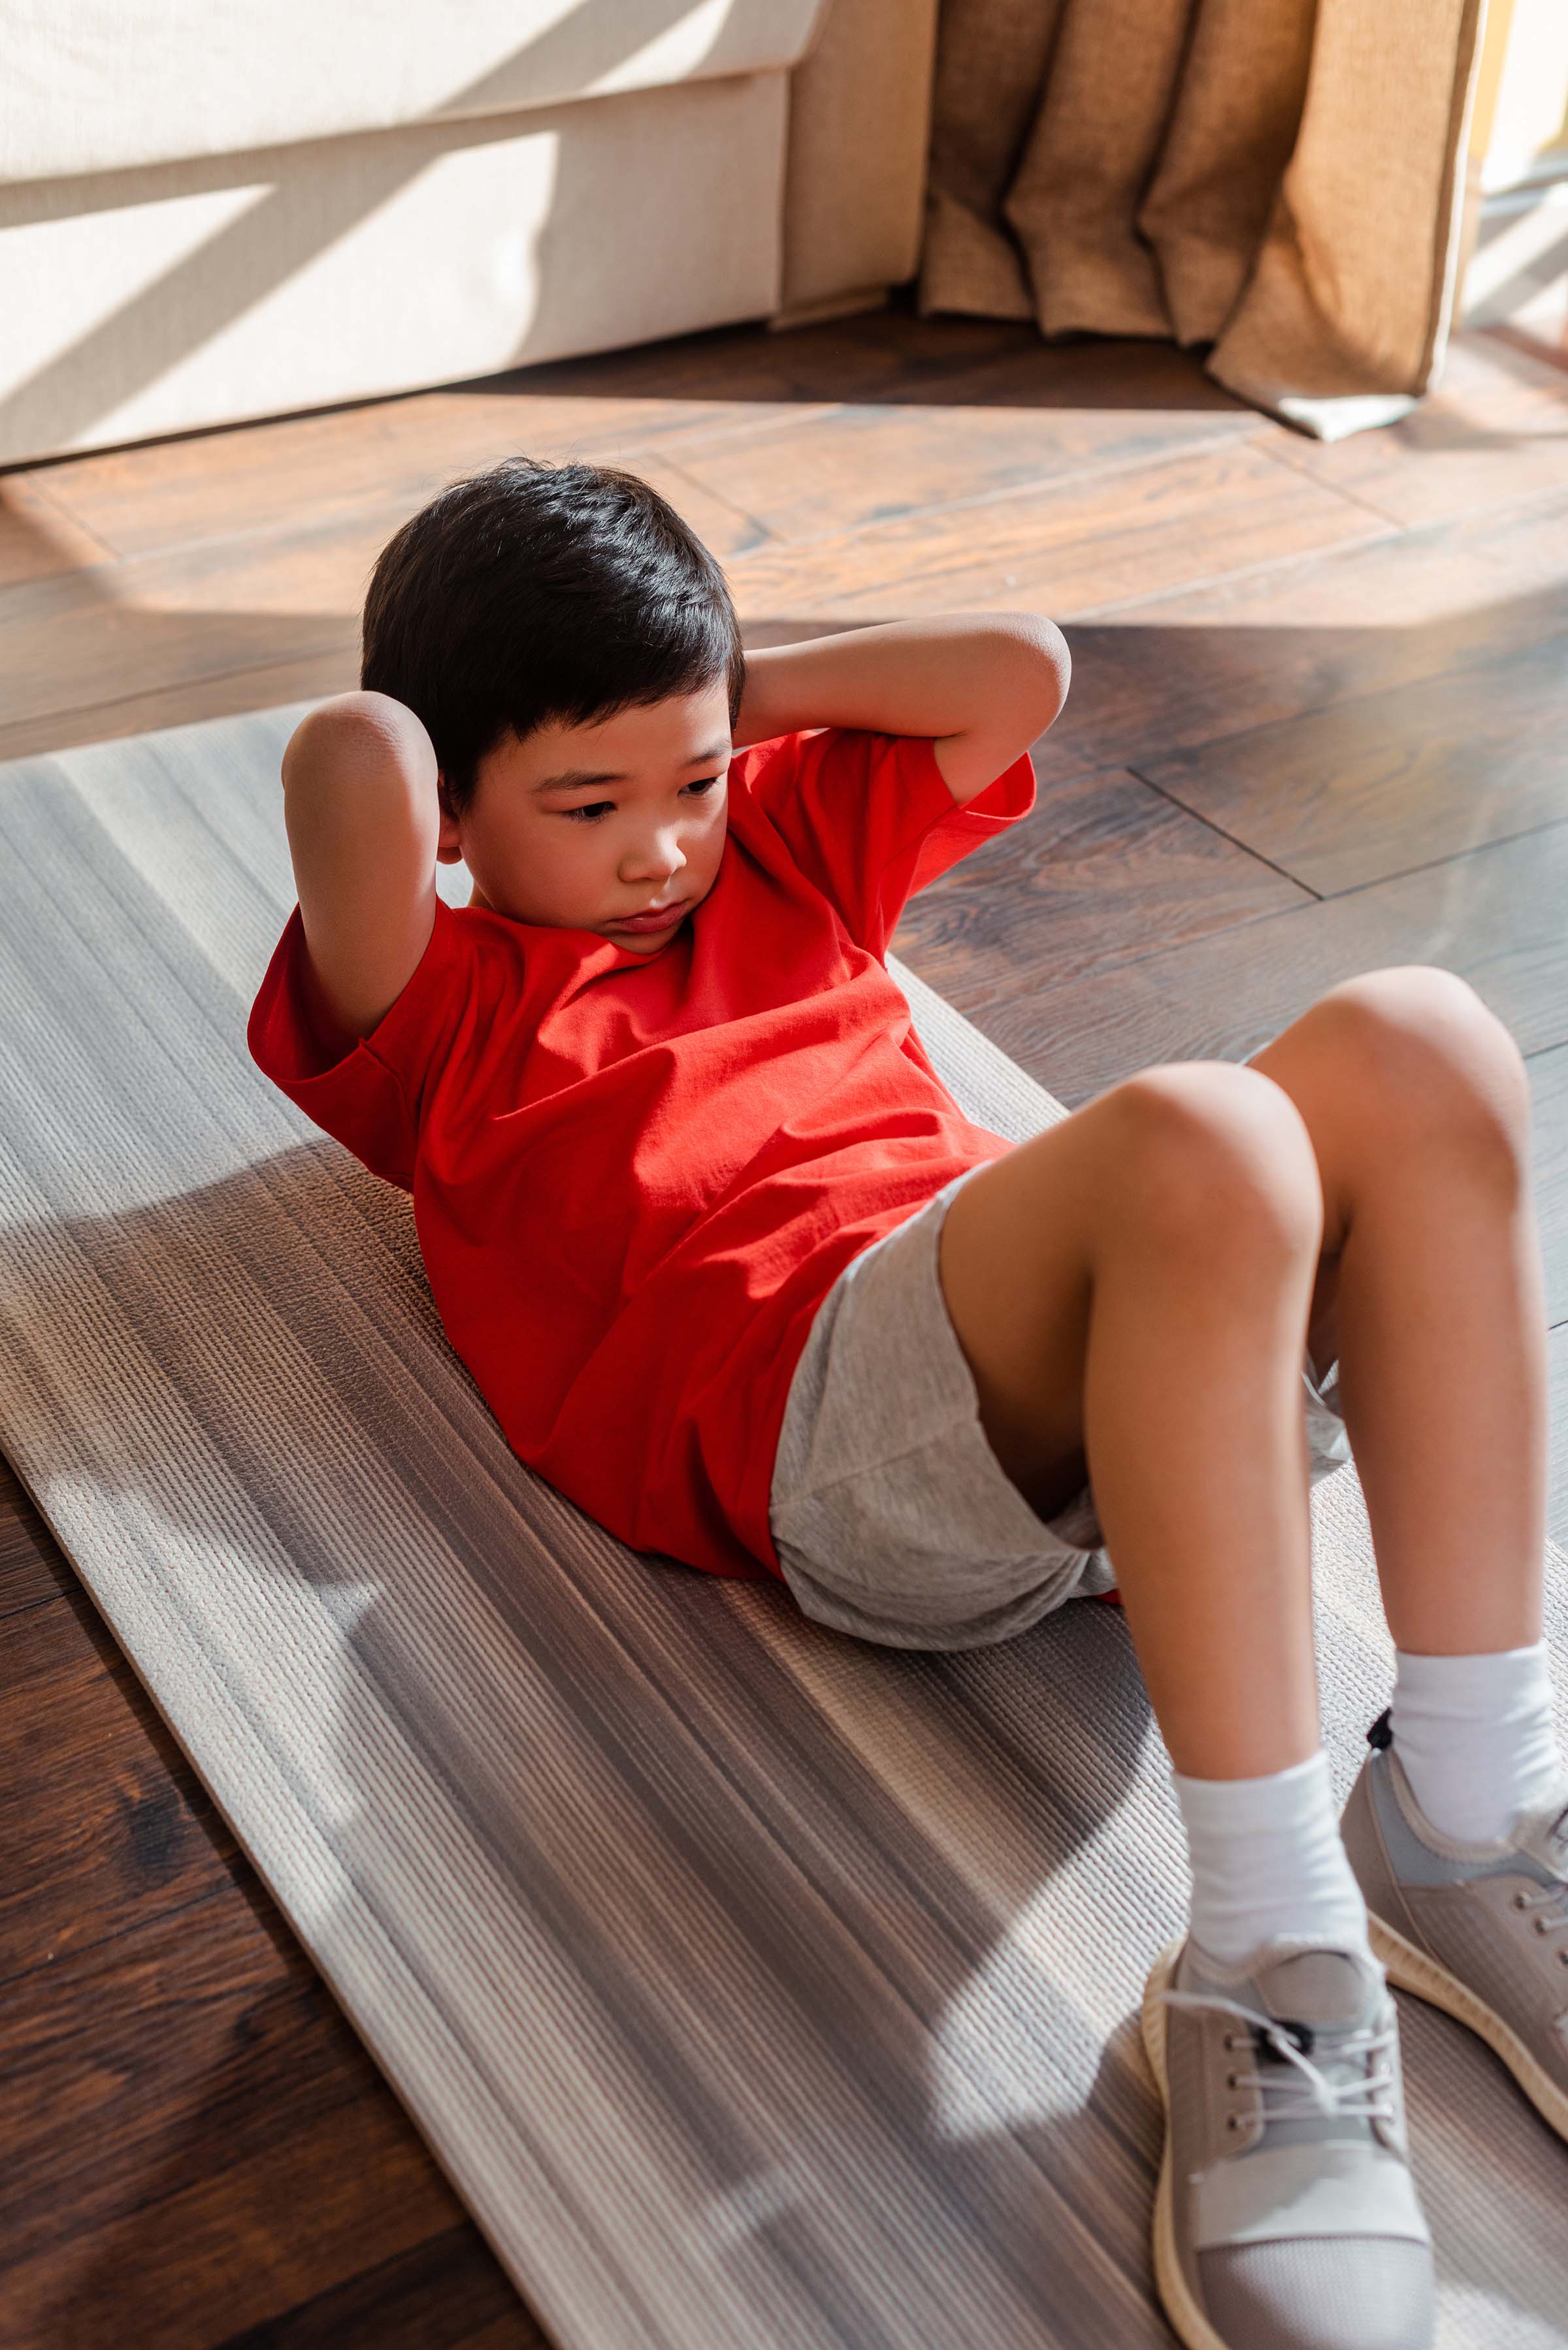 Asian boy doing sit ups in his home